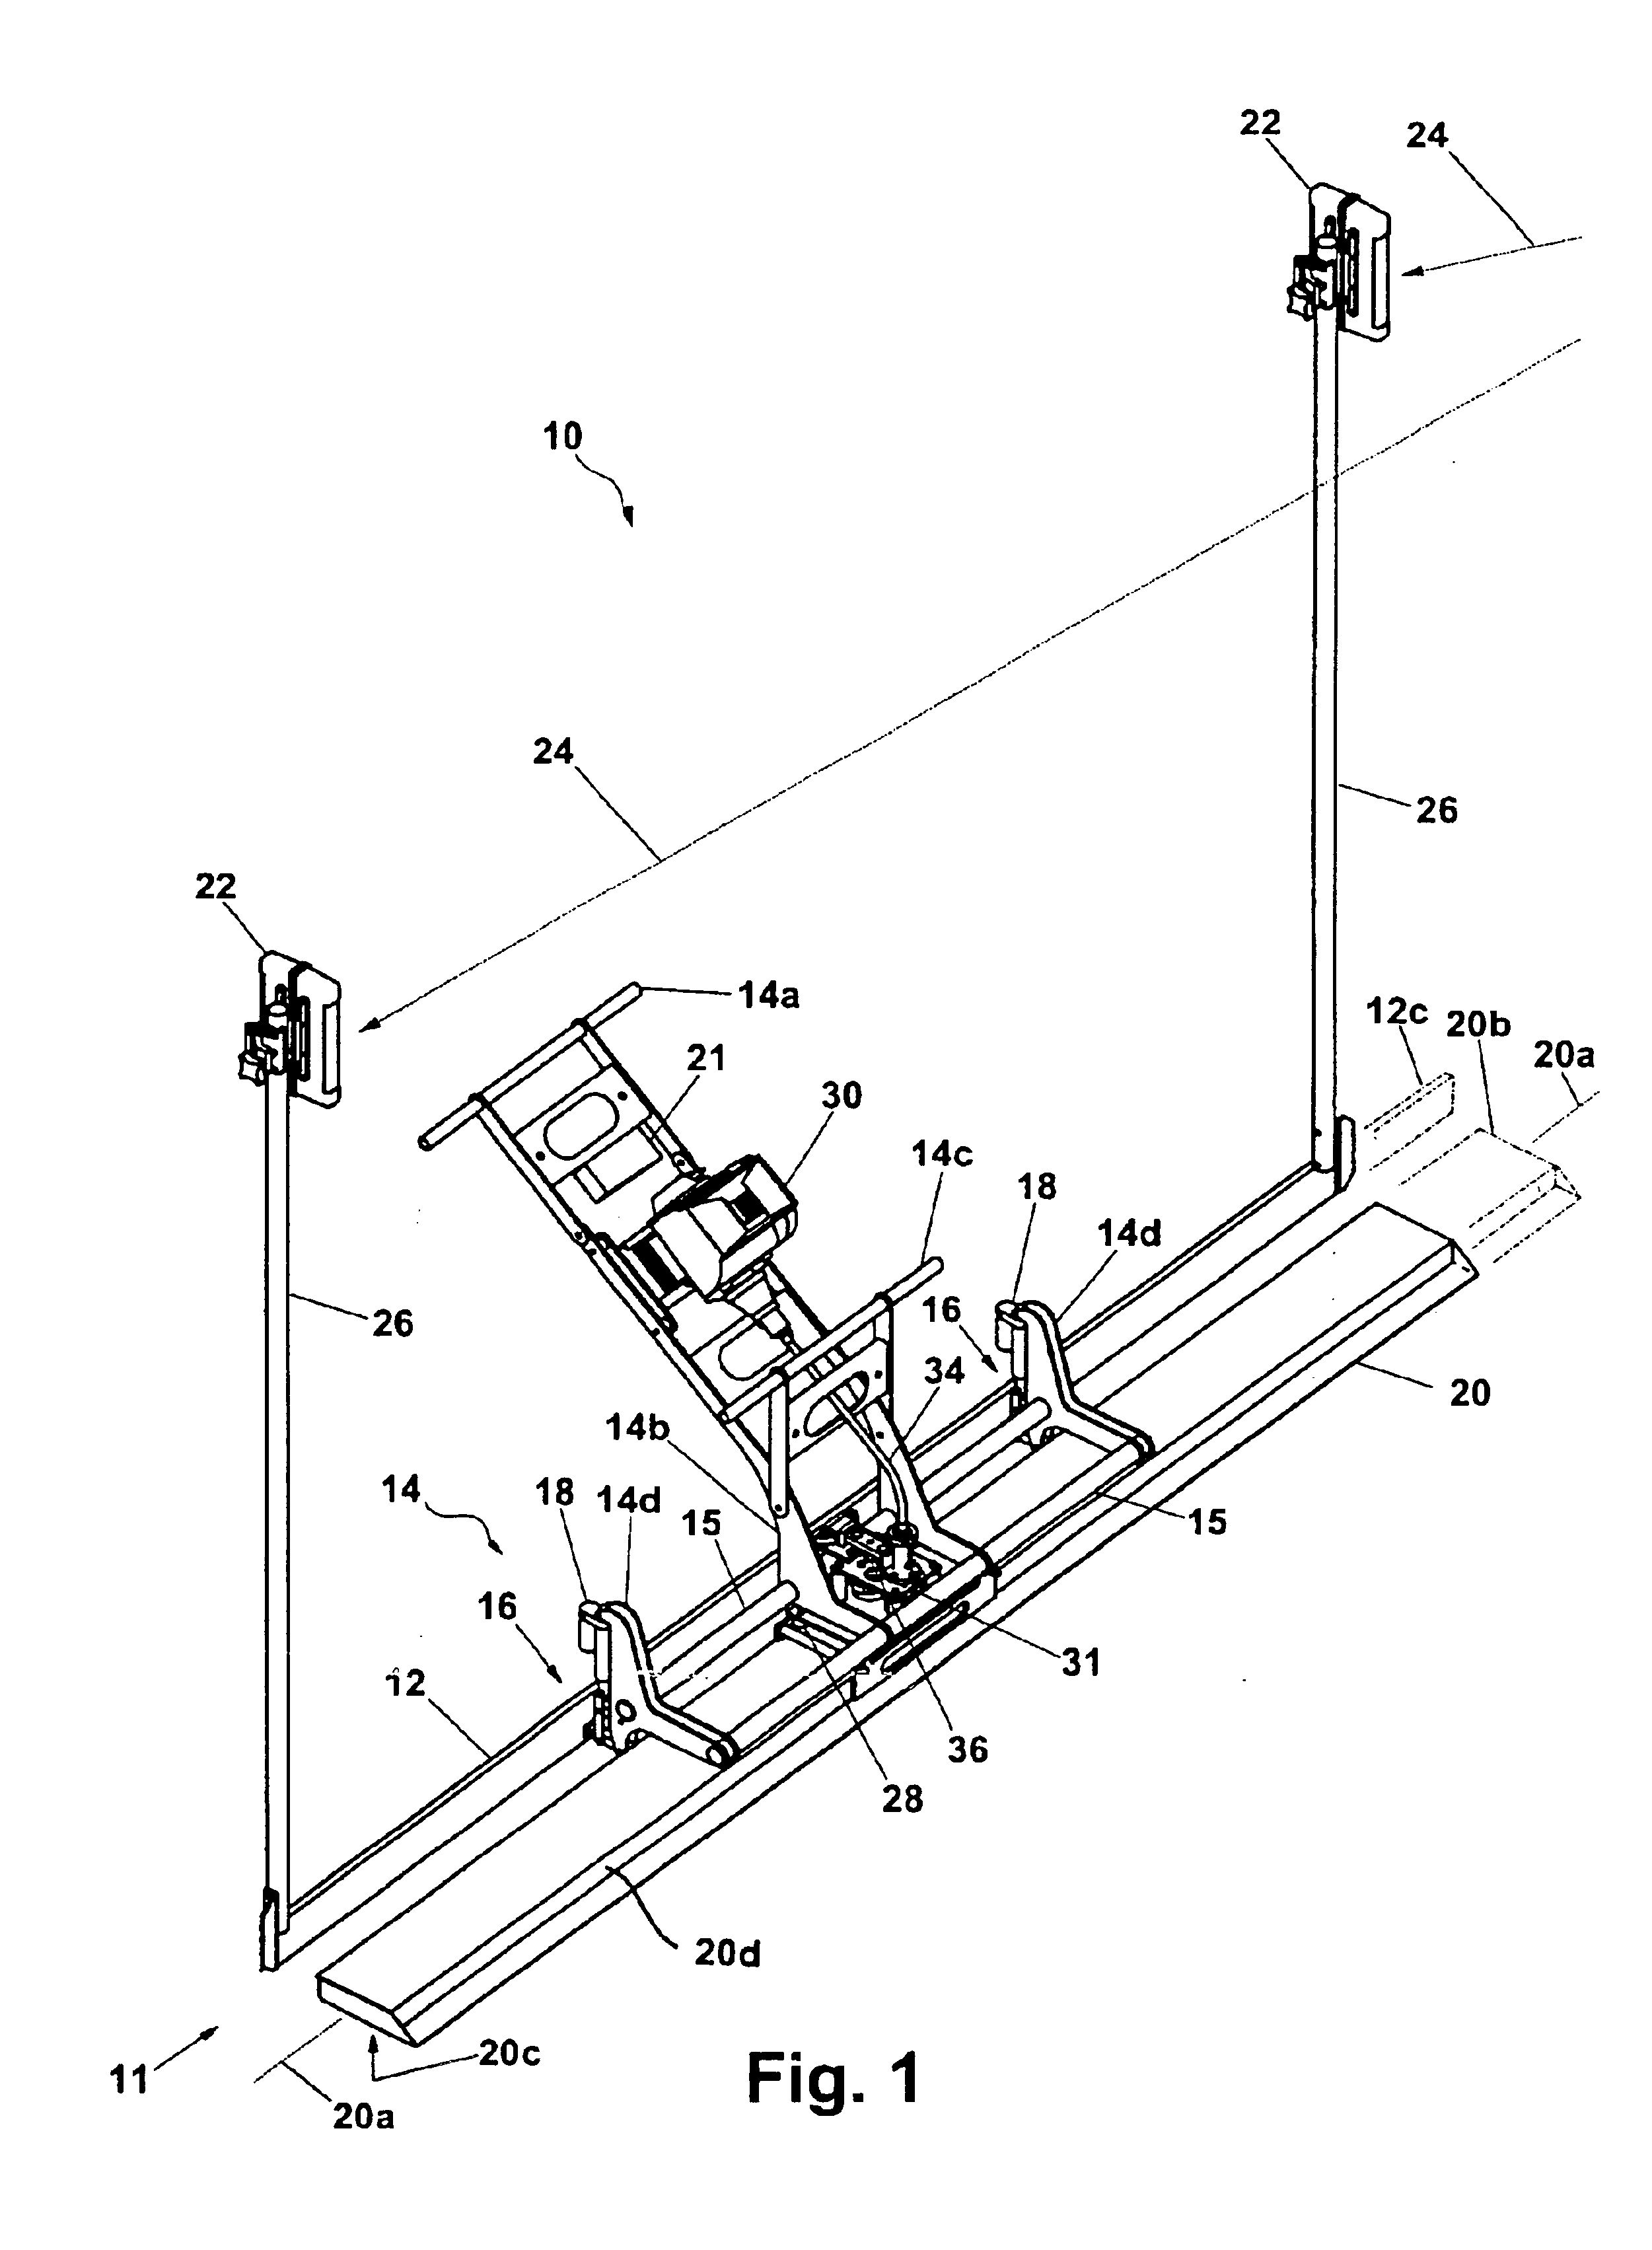 Lightweight apparatus for screeding and vibrating uncured concrete surfaces